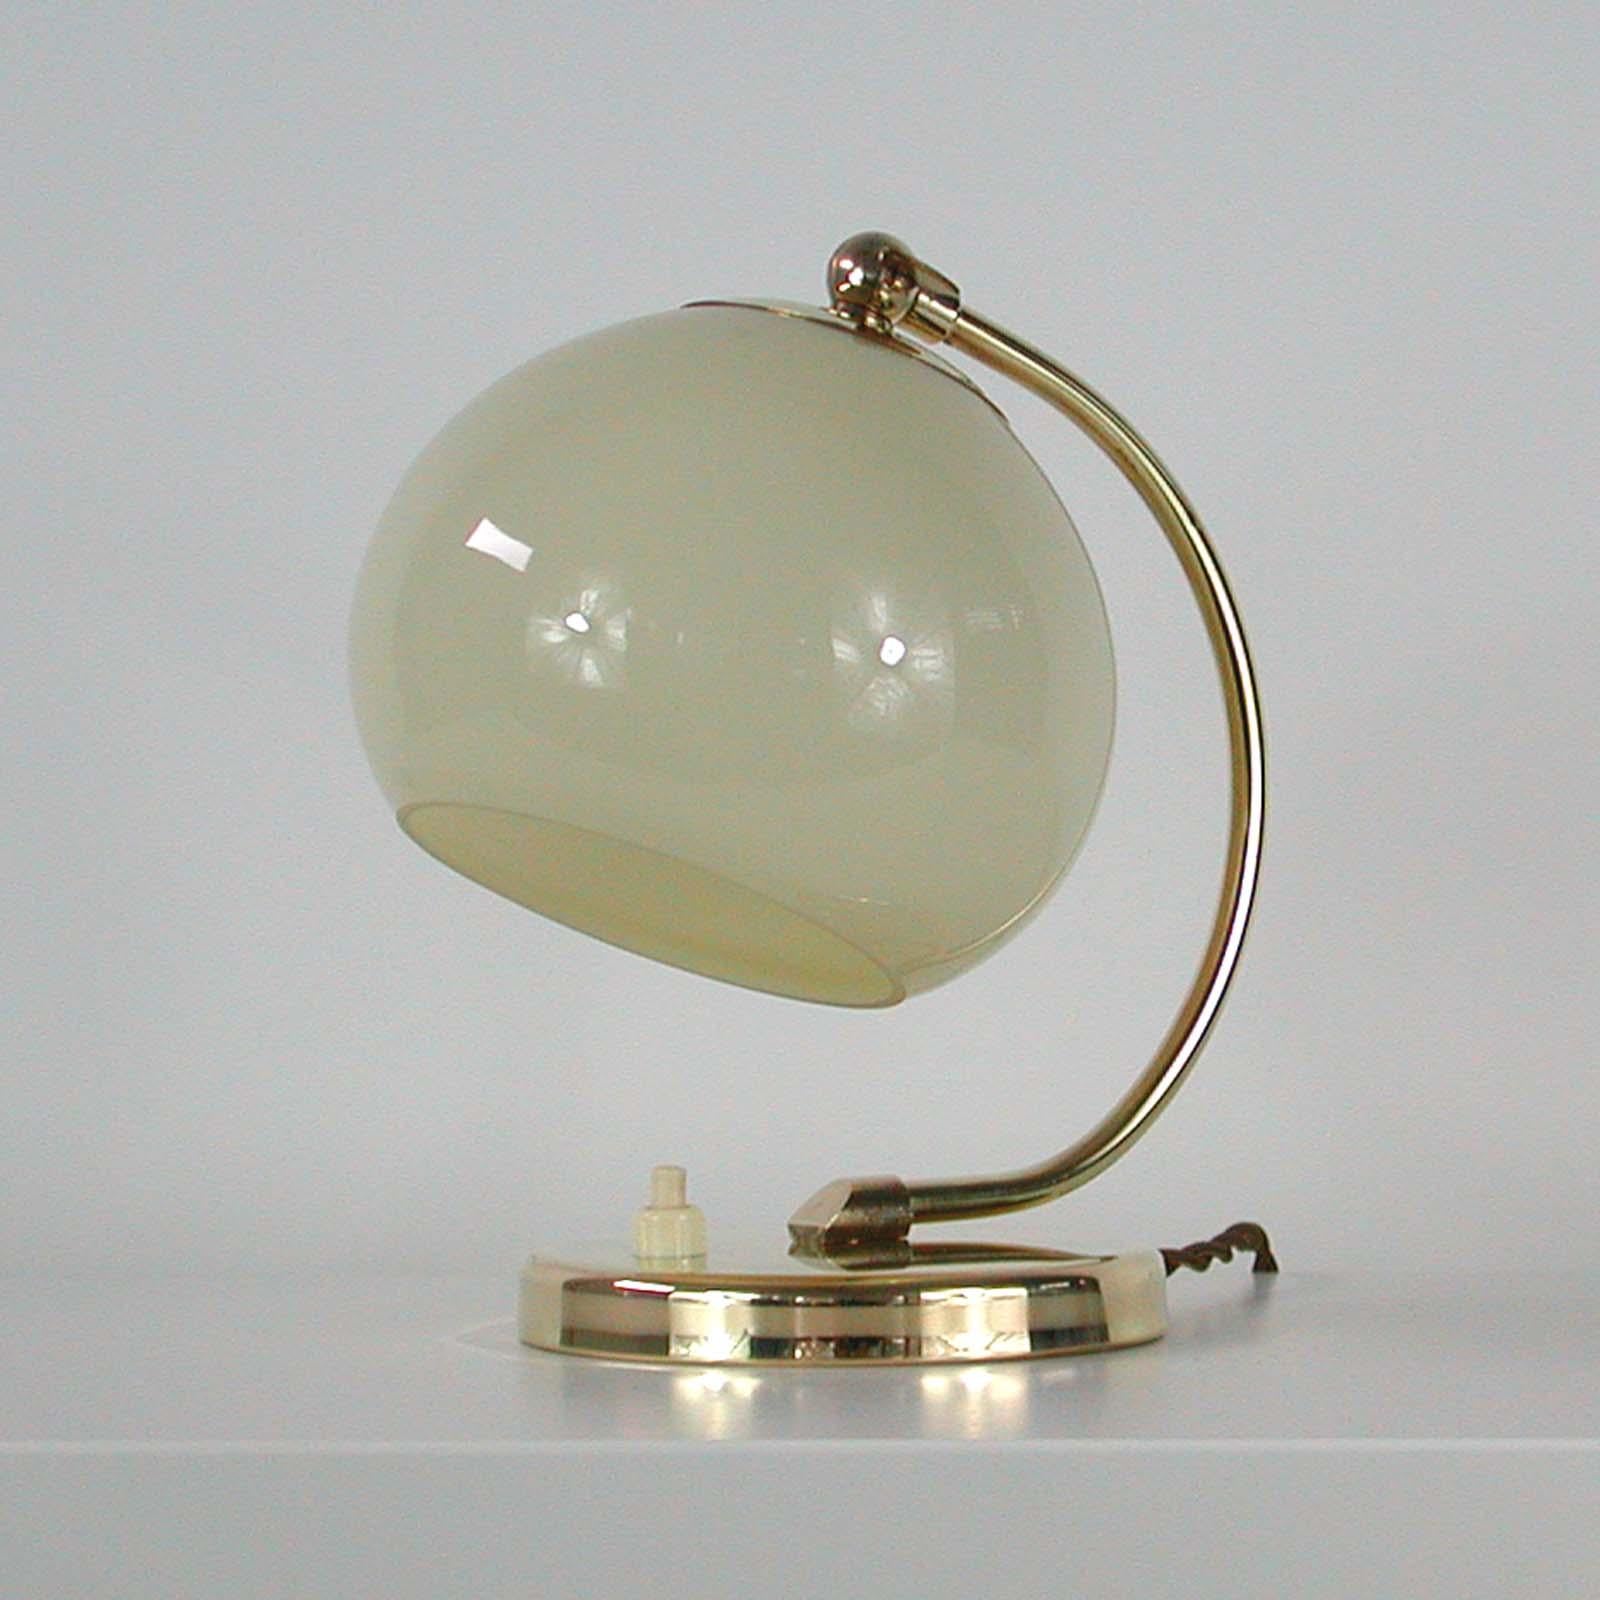 This pretty vintage table or bedside lamp was made in Germany in the 1930s during the Bauhaus period. It is made of brass and has got an adjustable lamp shade made of opaline glass.

Rewired with new silk cord and ready for use in any country of